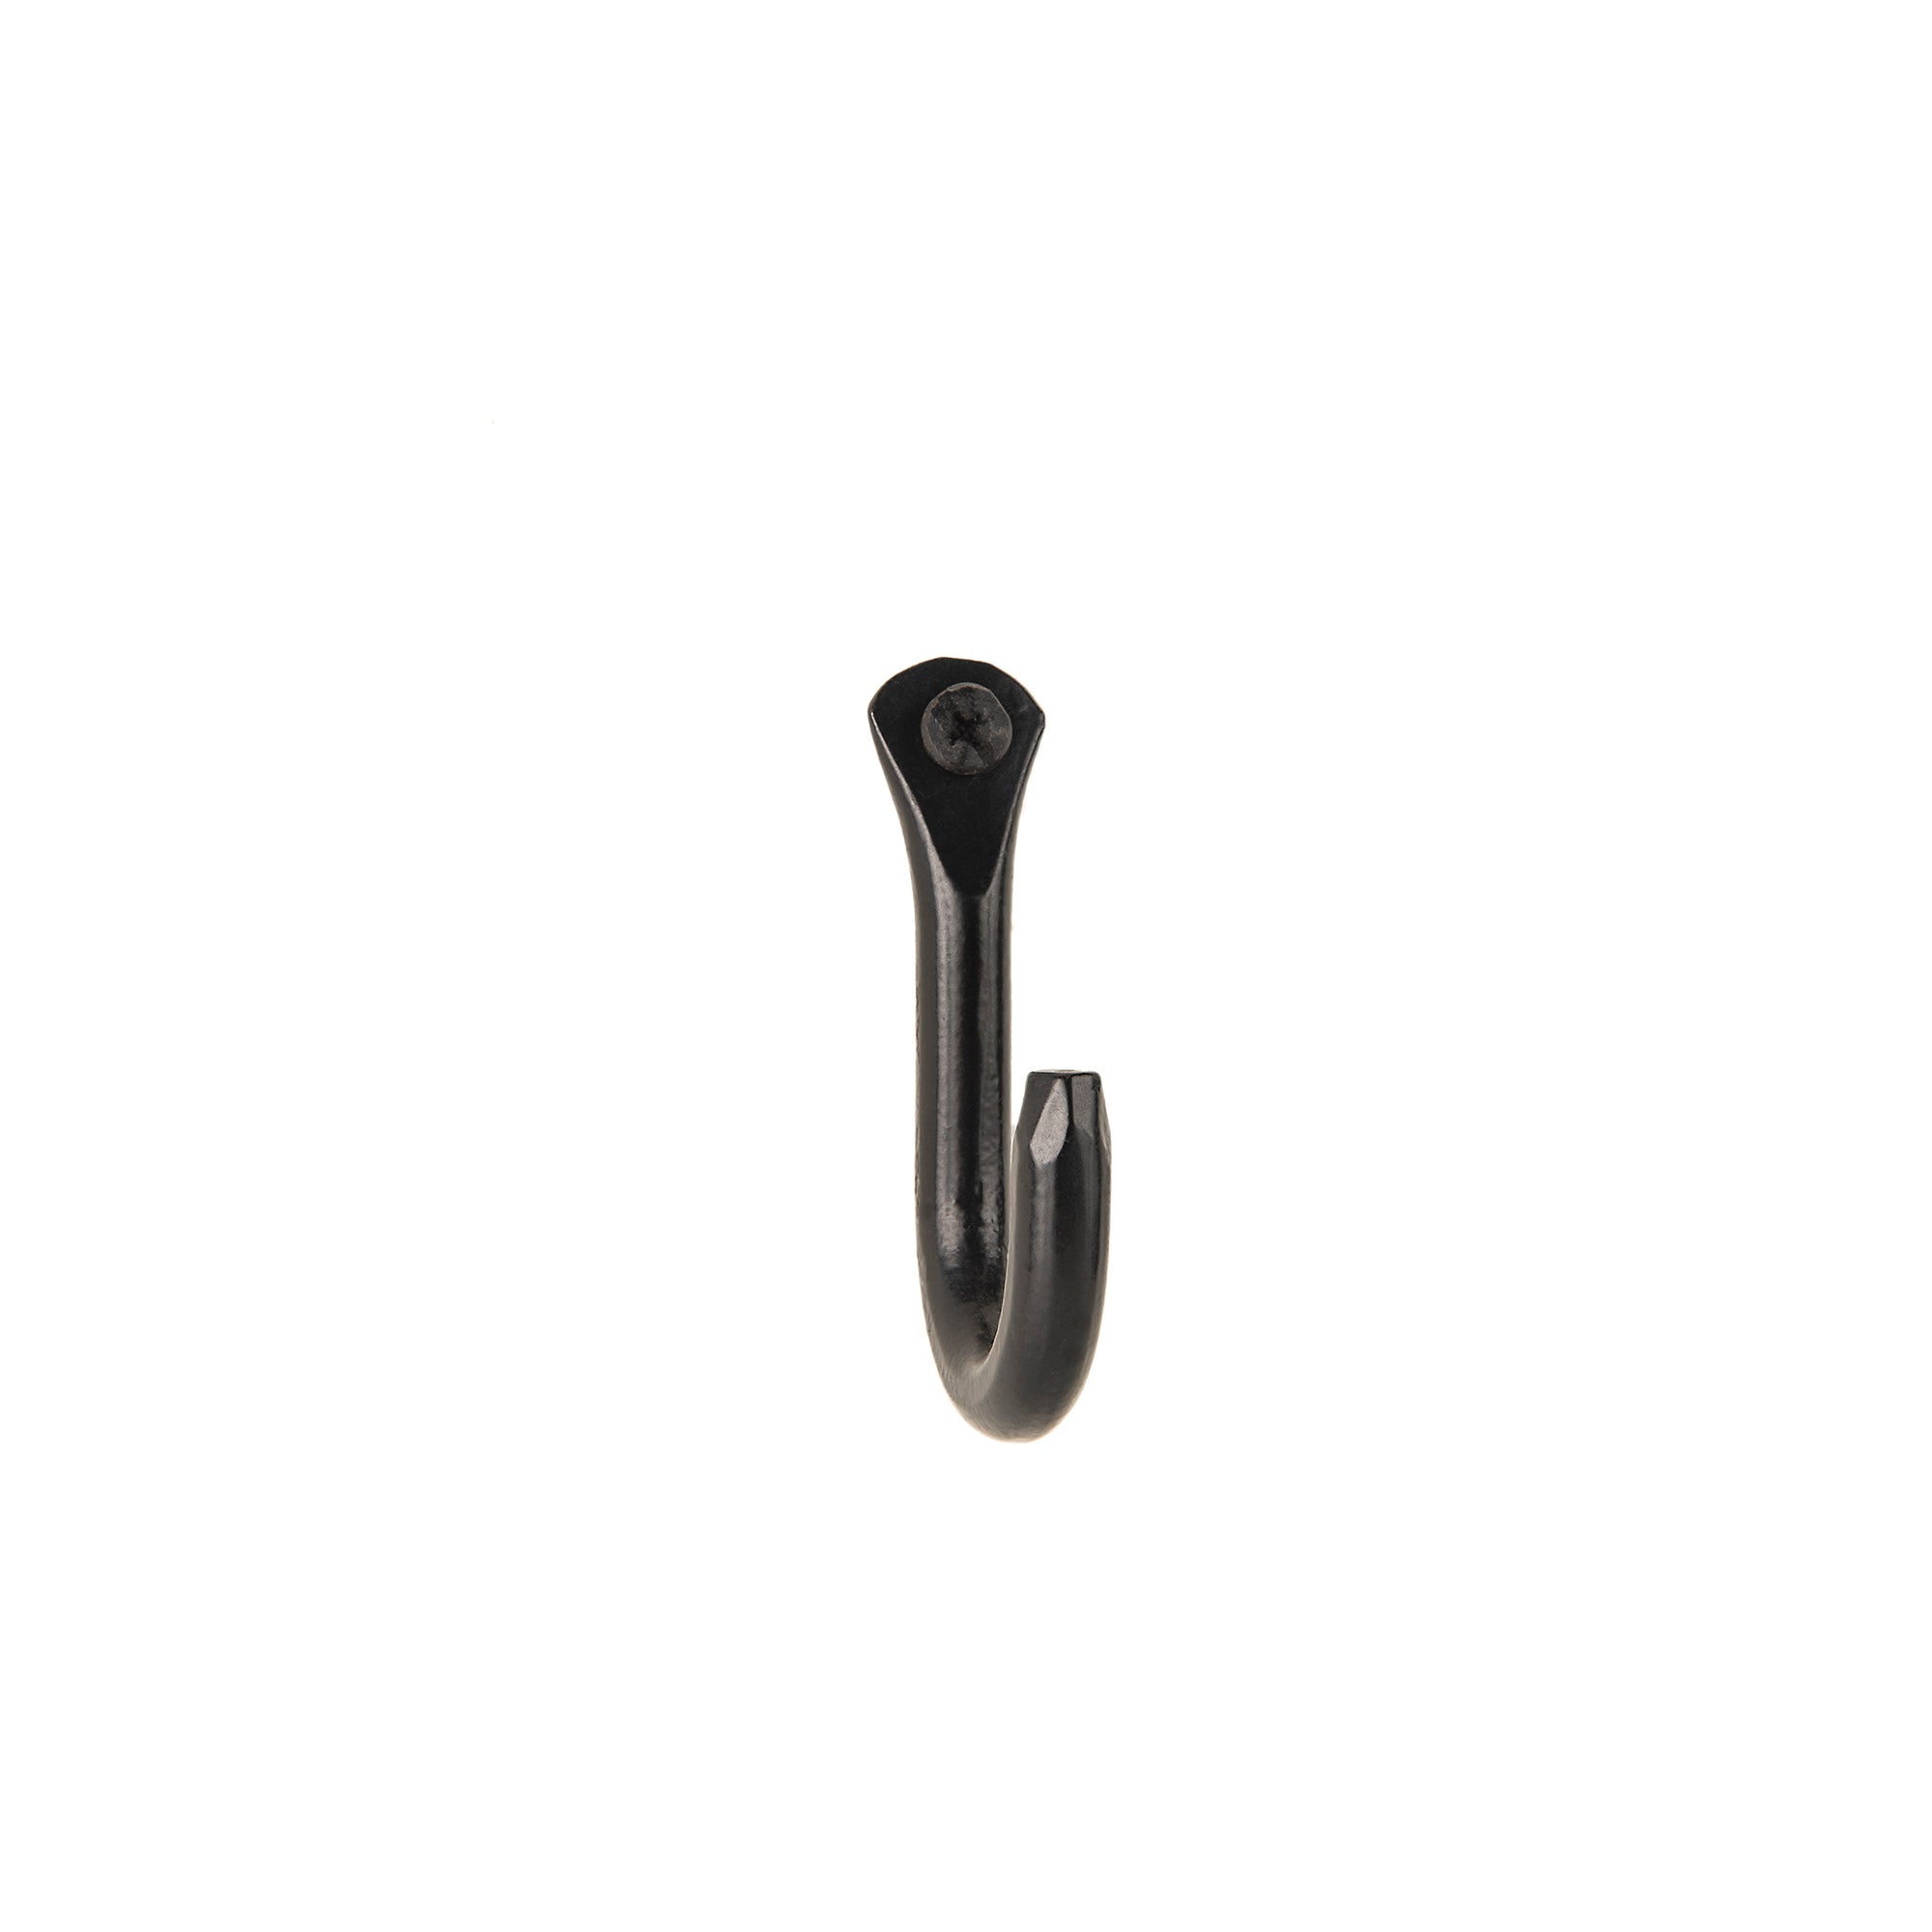 3 x Screw In Ceiling Hook Hand Forged Rustic Iron Black Wax Hook